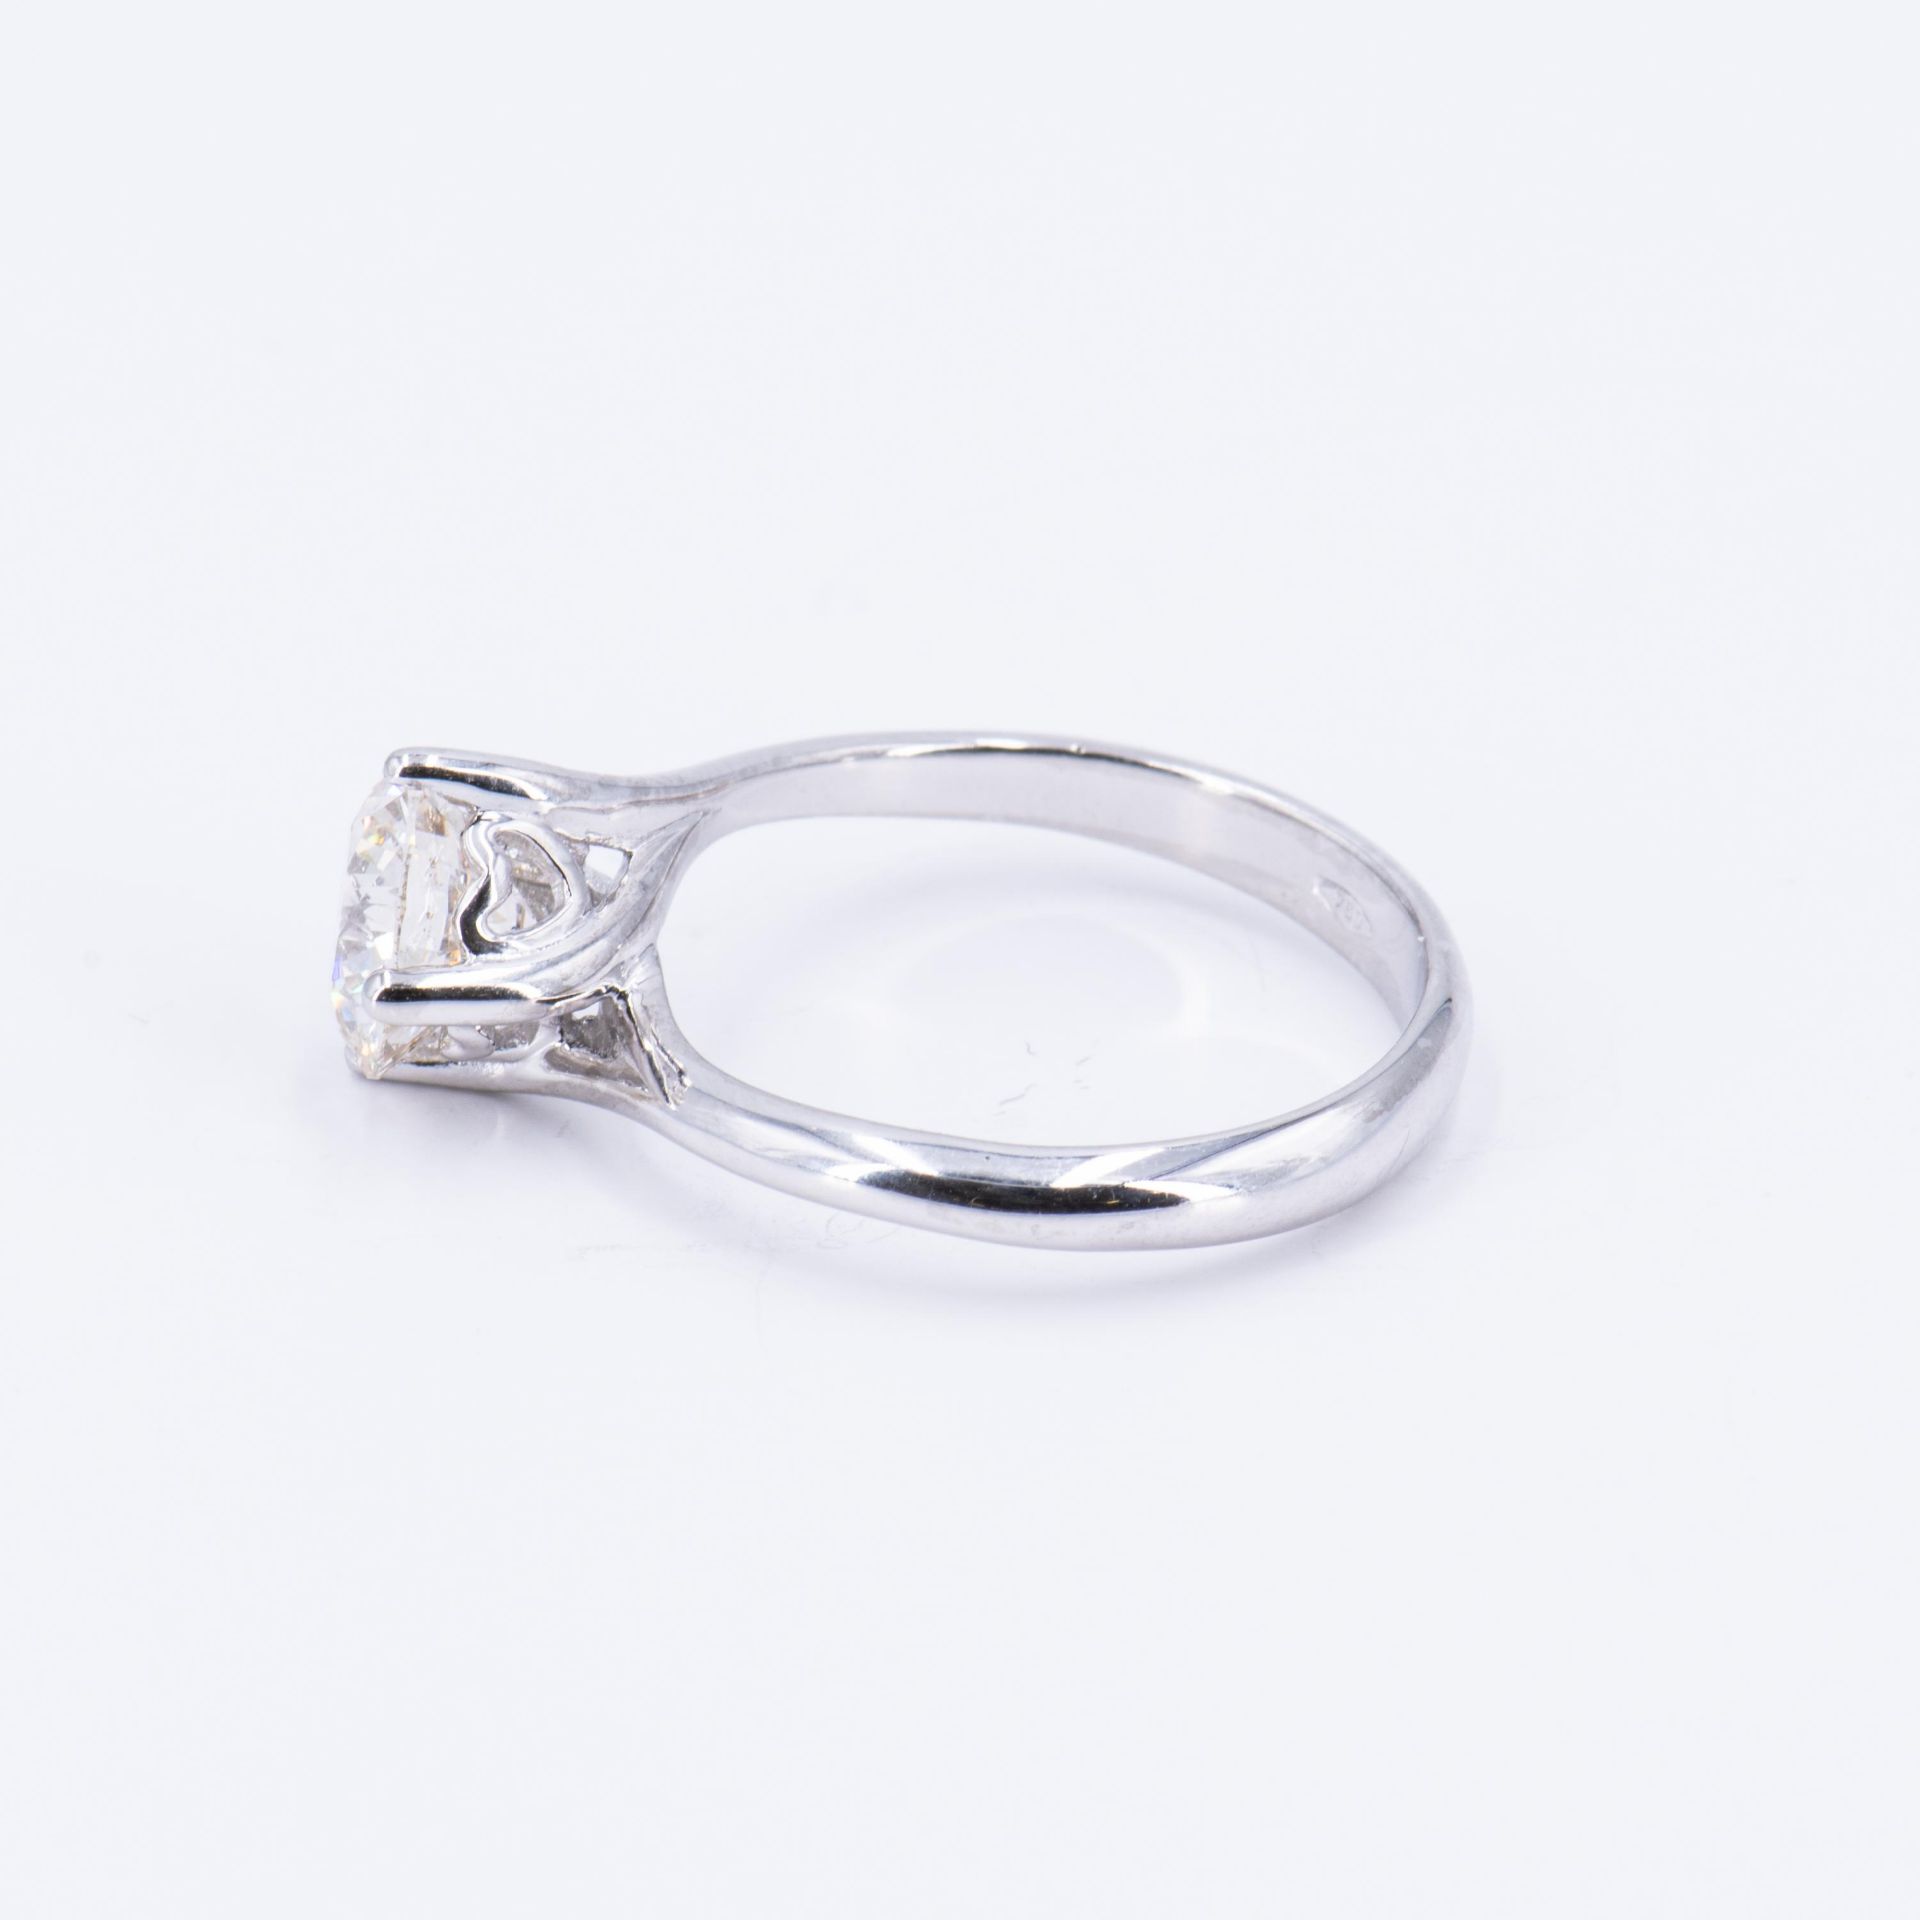 Solitaire Ring - Image 2 of 5